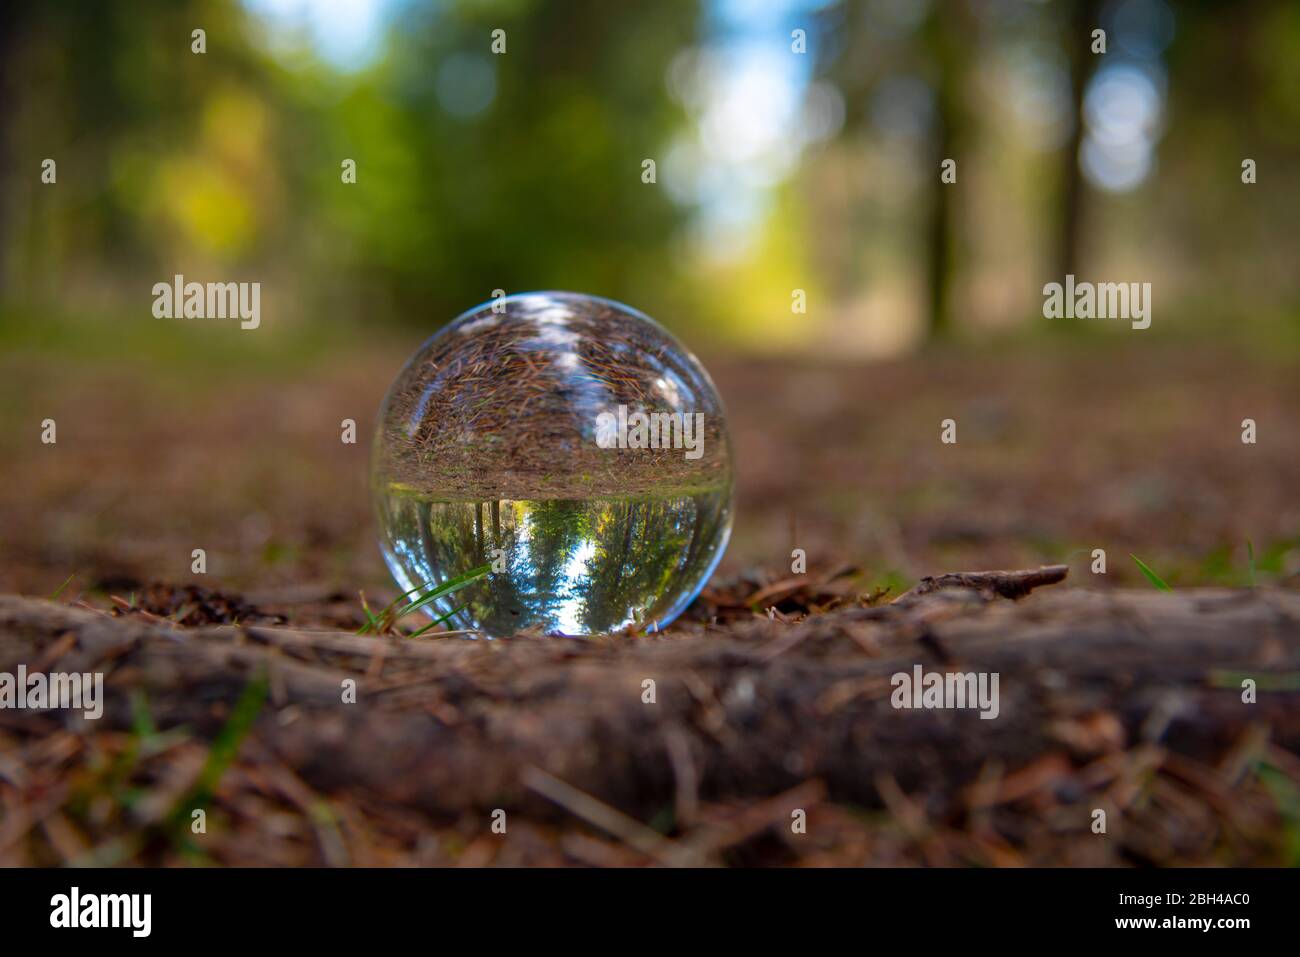 A glass ball on a forest path.  Stock Photo